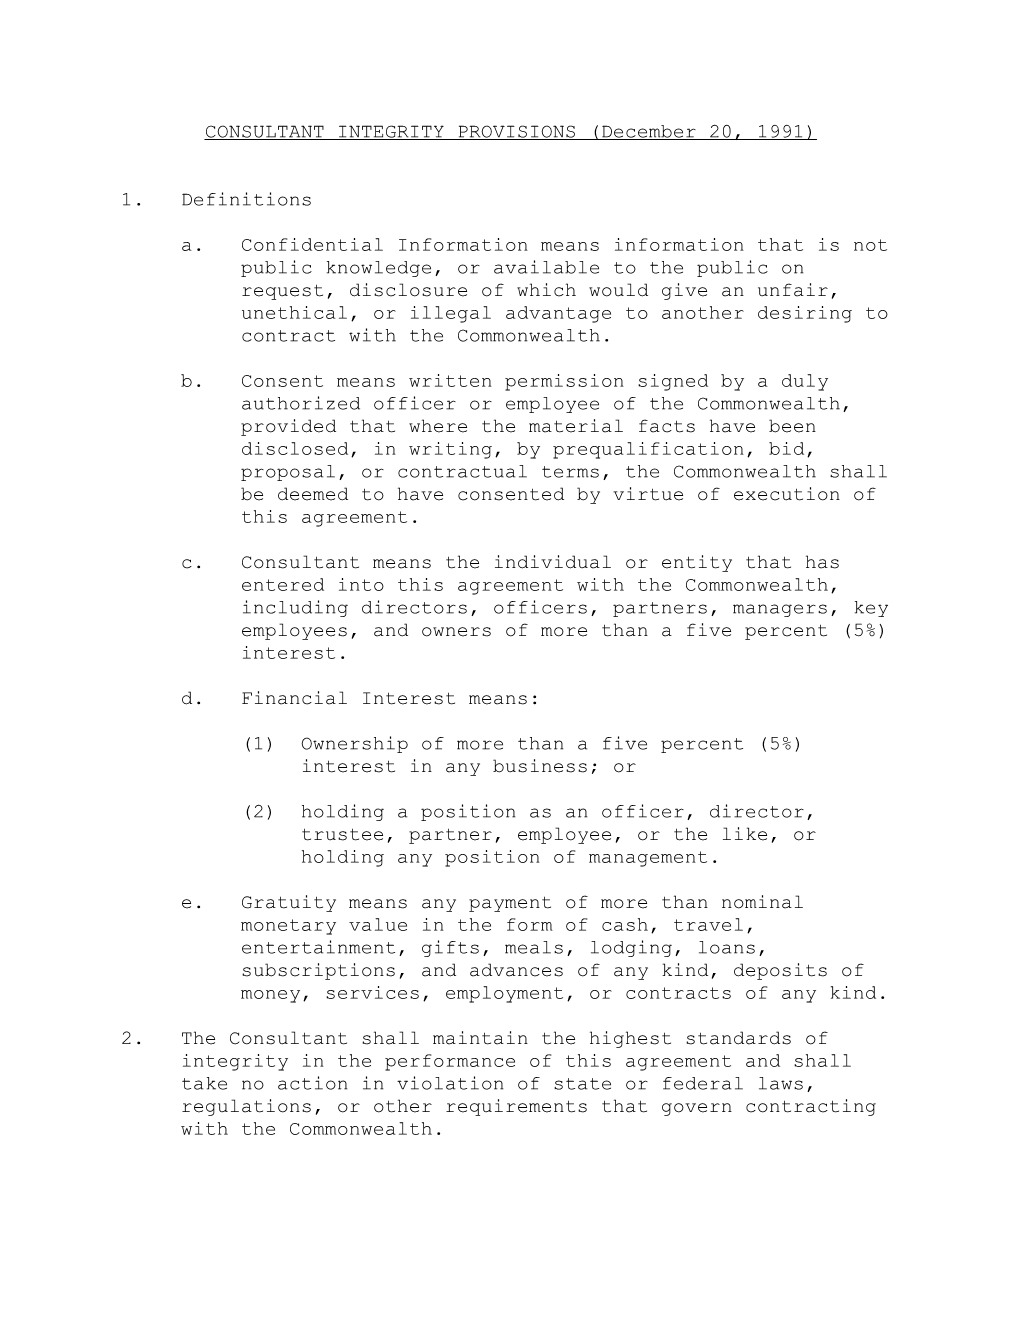 CONSULTANT INTEGRITY PROVISIONS, April 1992